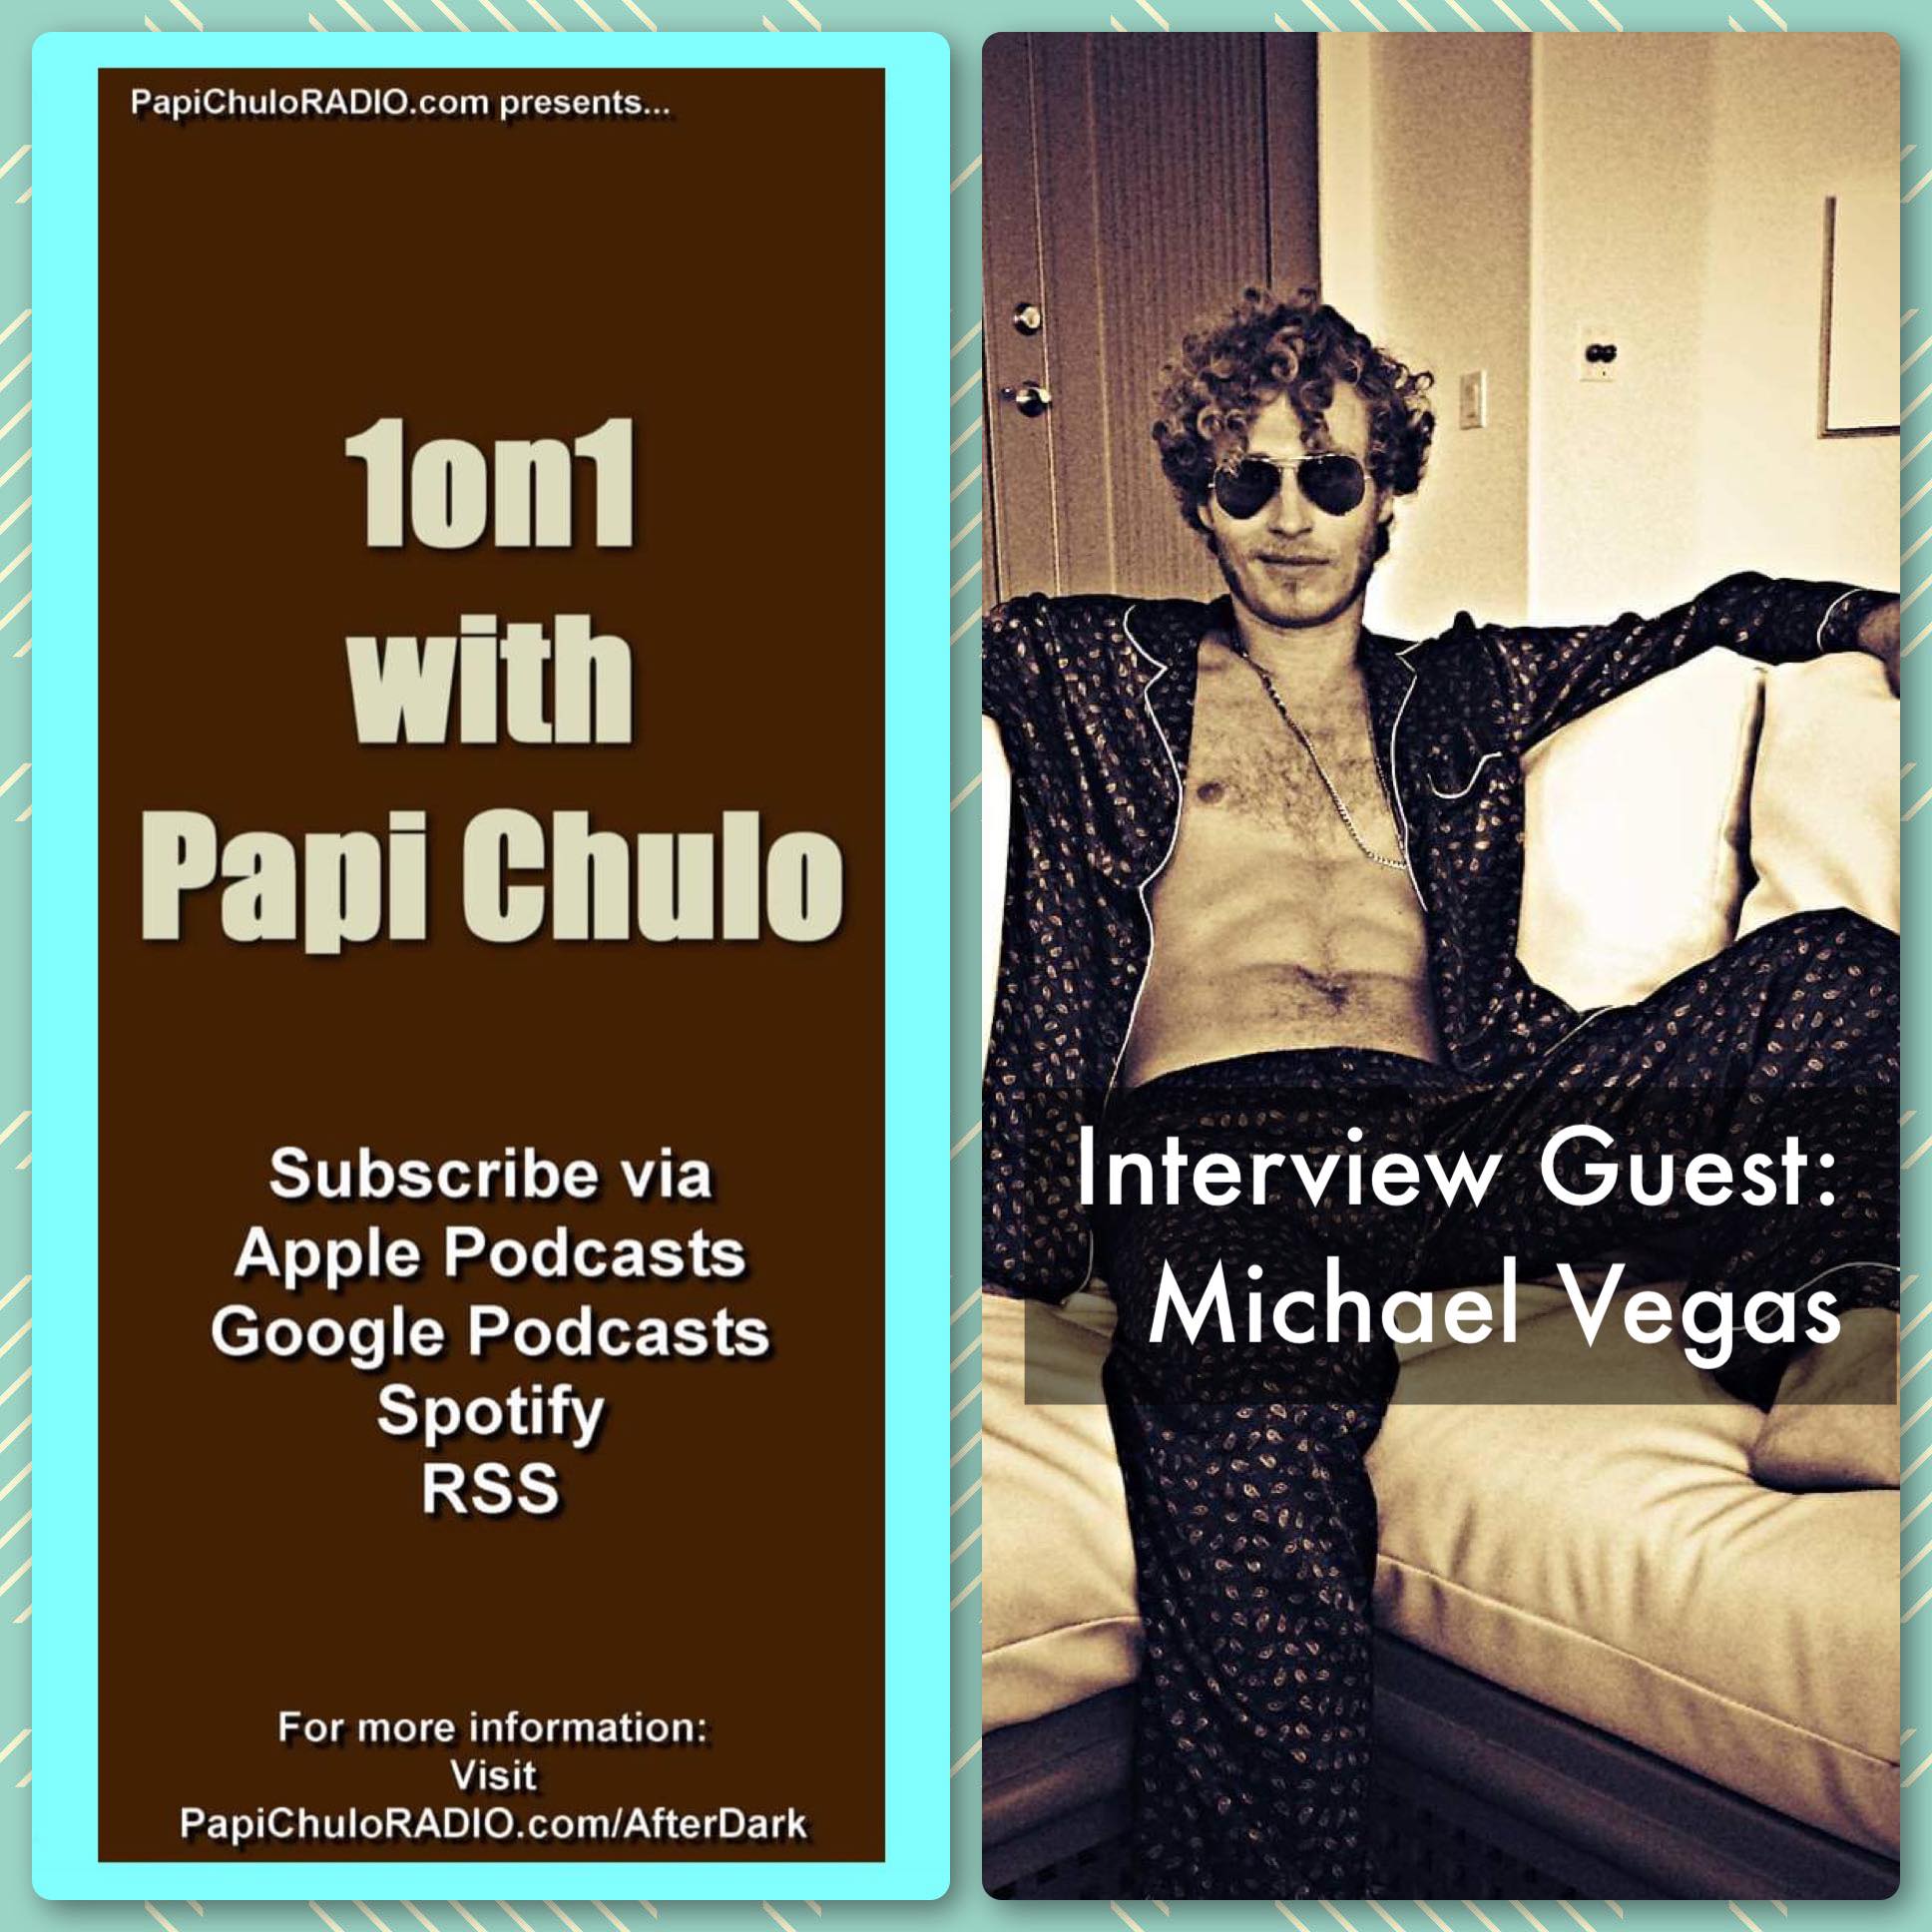 1on1 with Papi Chulo – Special Guest: MICHAEL VEGAS [April 22, 2015]